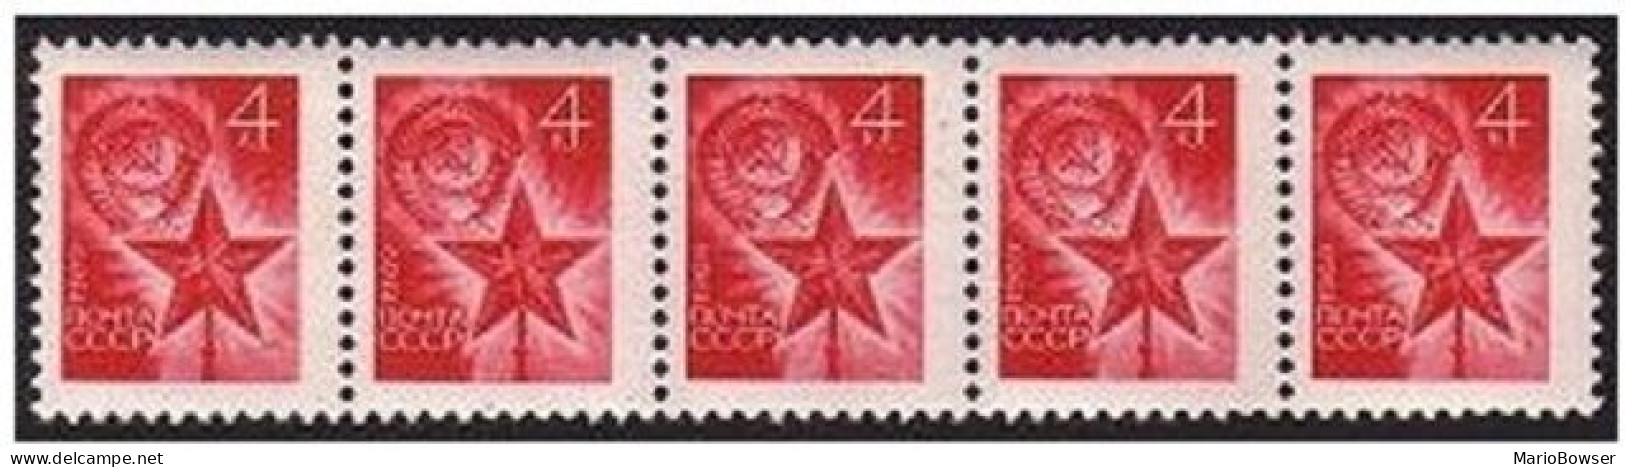 Russia 3670 Coil Strip Of 5,one With Number,MNH.Michel 3697. Arms Of USSR,Star. - Ungebraucht